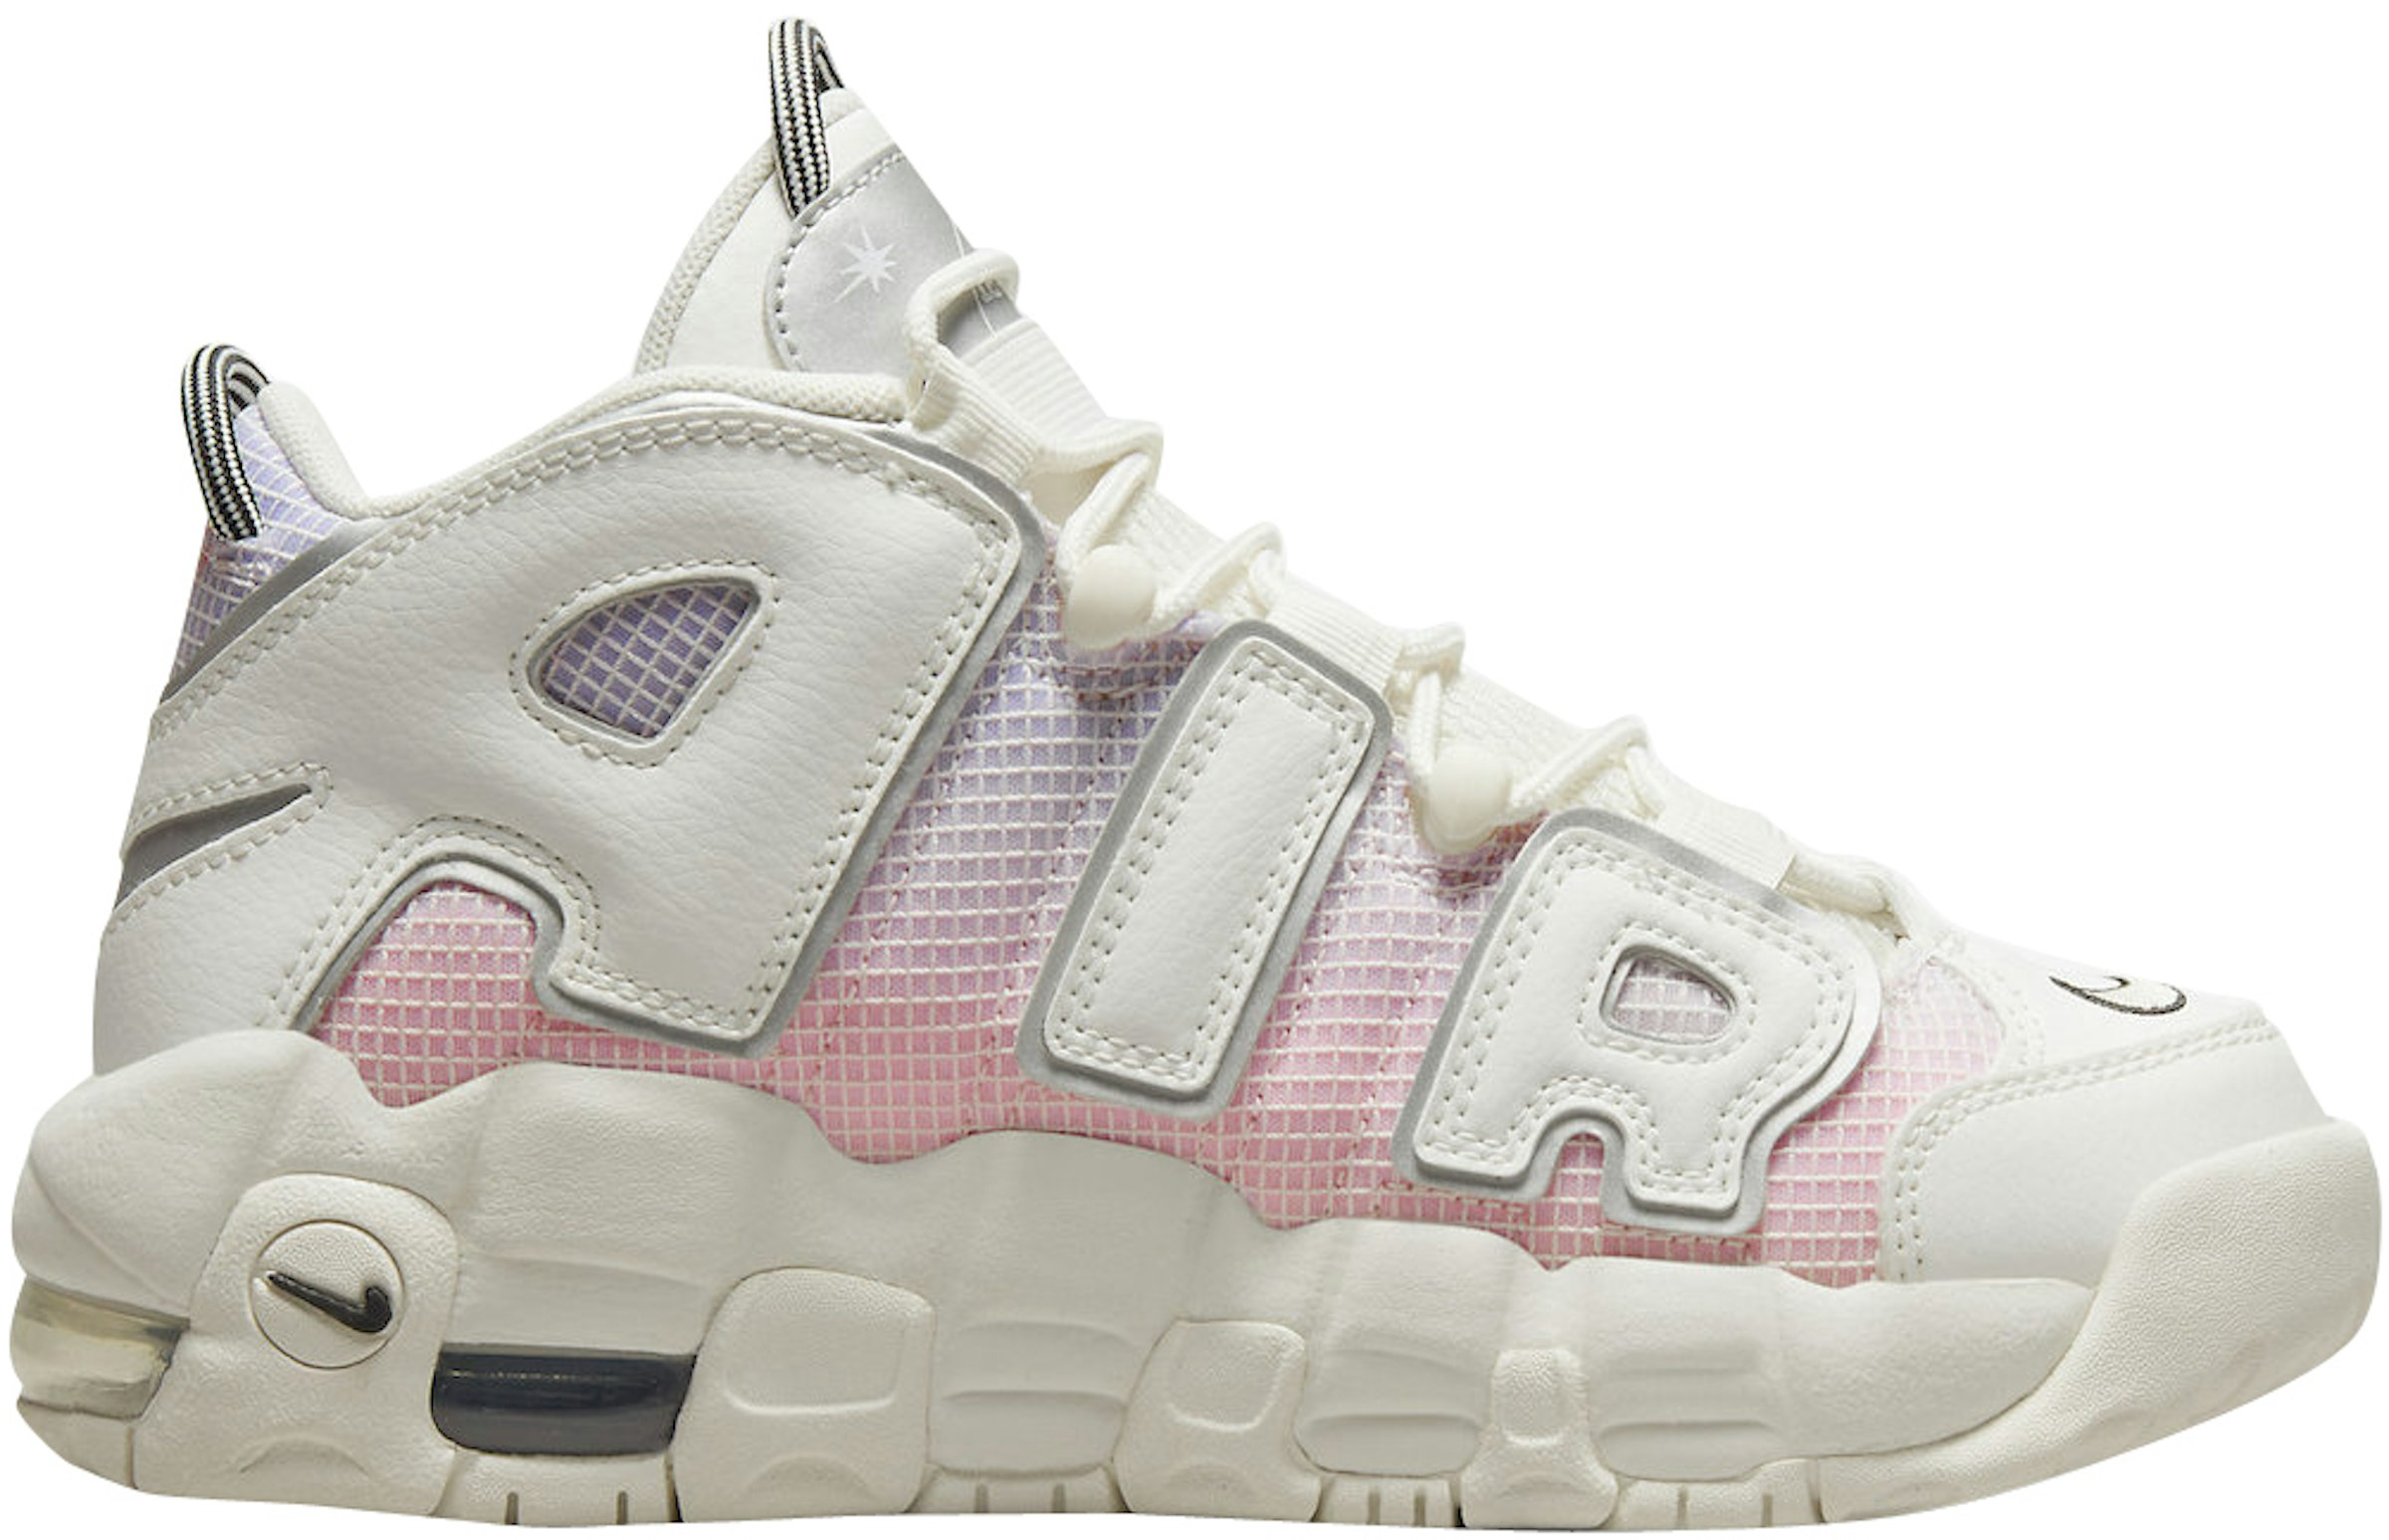 Componer Nervio Multitud Nike Air More Uptempo 96 QS Thank You, Wilson (GS) Kids' - DQ0514-100 - US